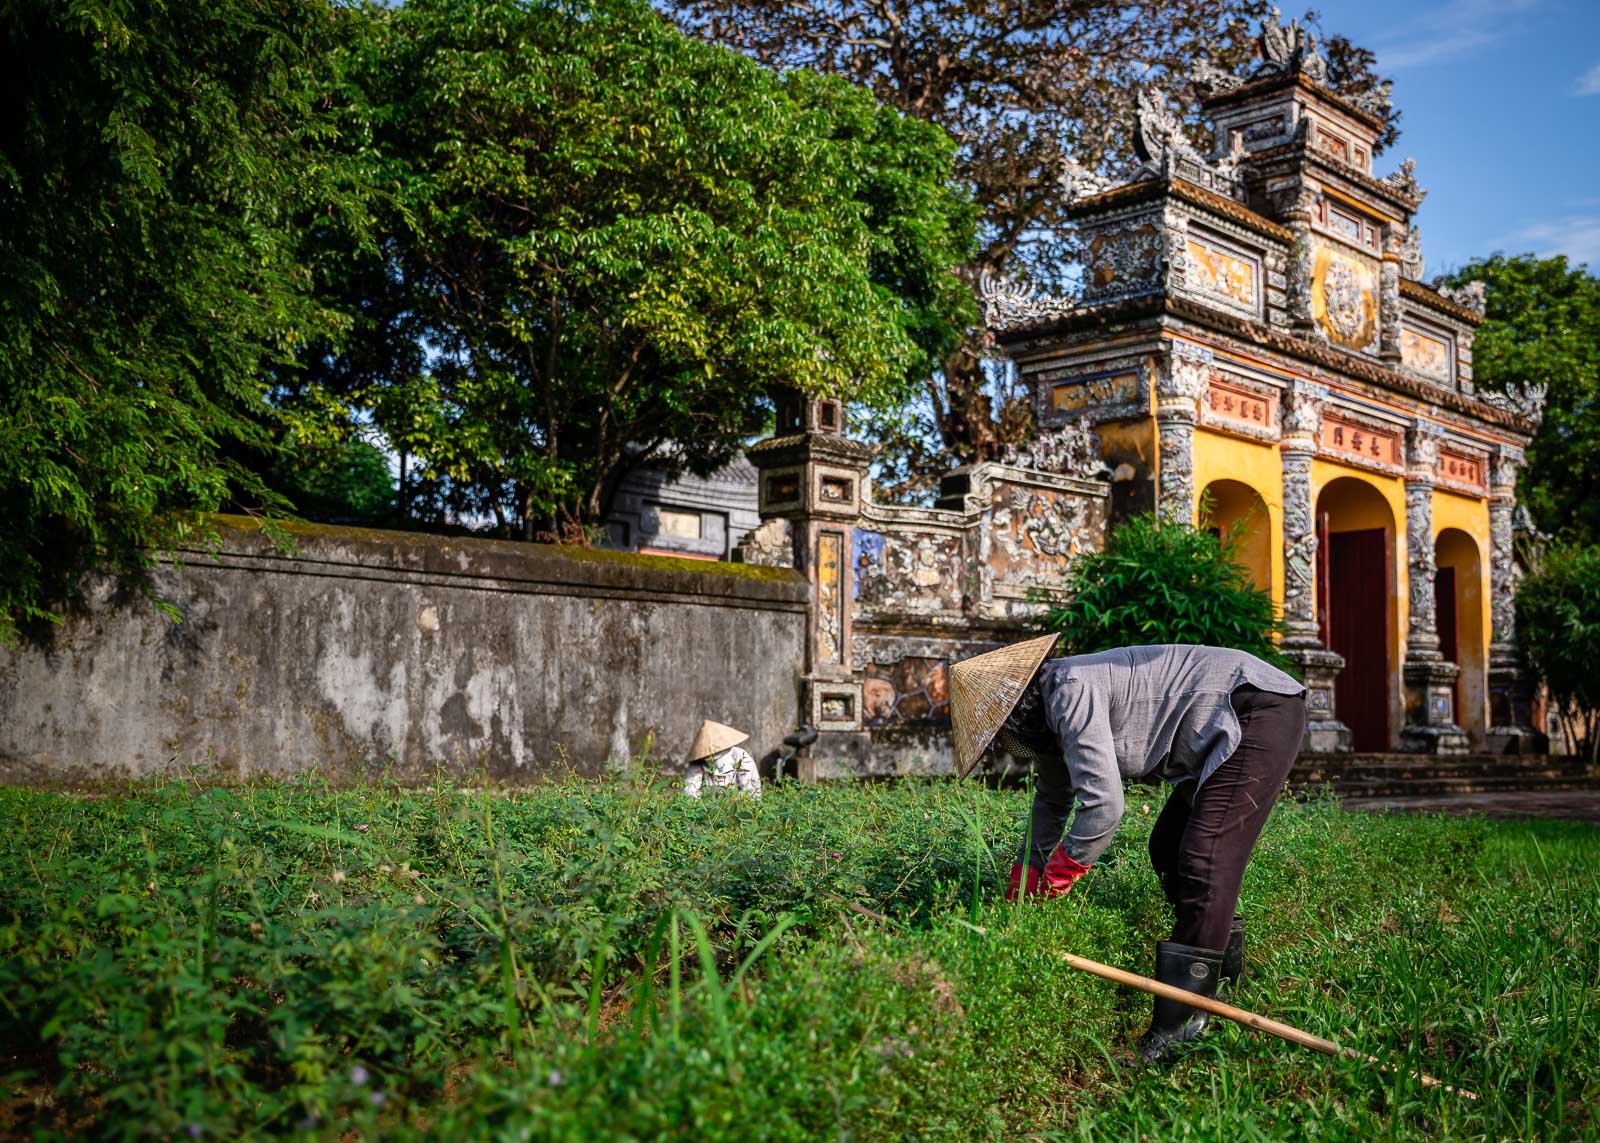 vietnamese woman with traditional hat gardening and tending to green gardens with vietnamese architecture arch in background